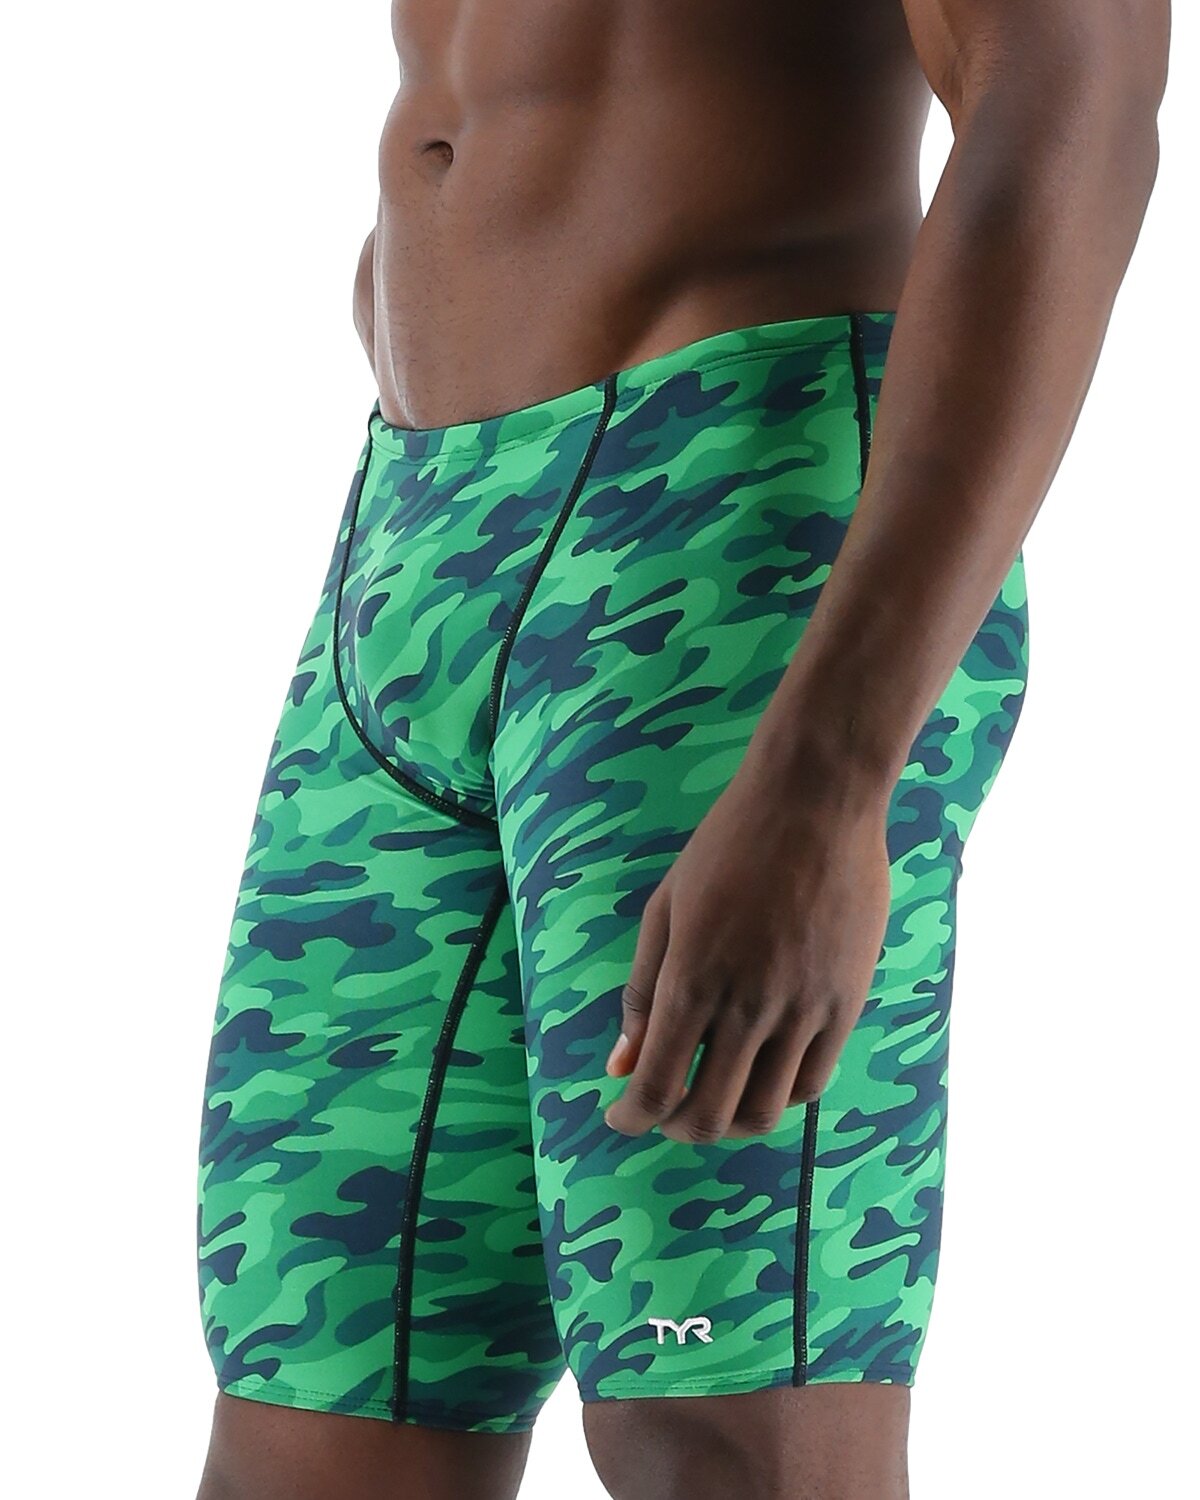 TYR Green Camo Jammer Size 32